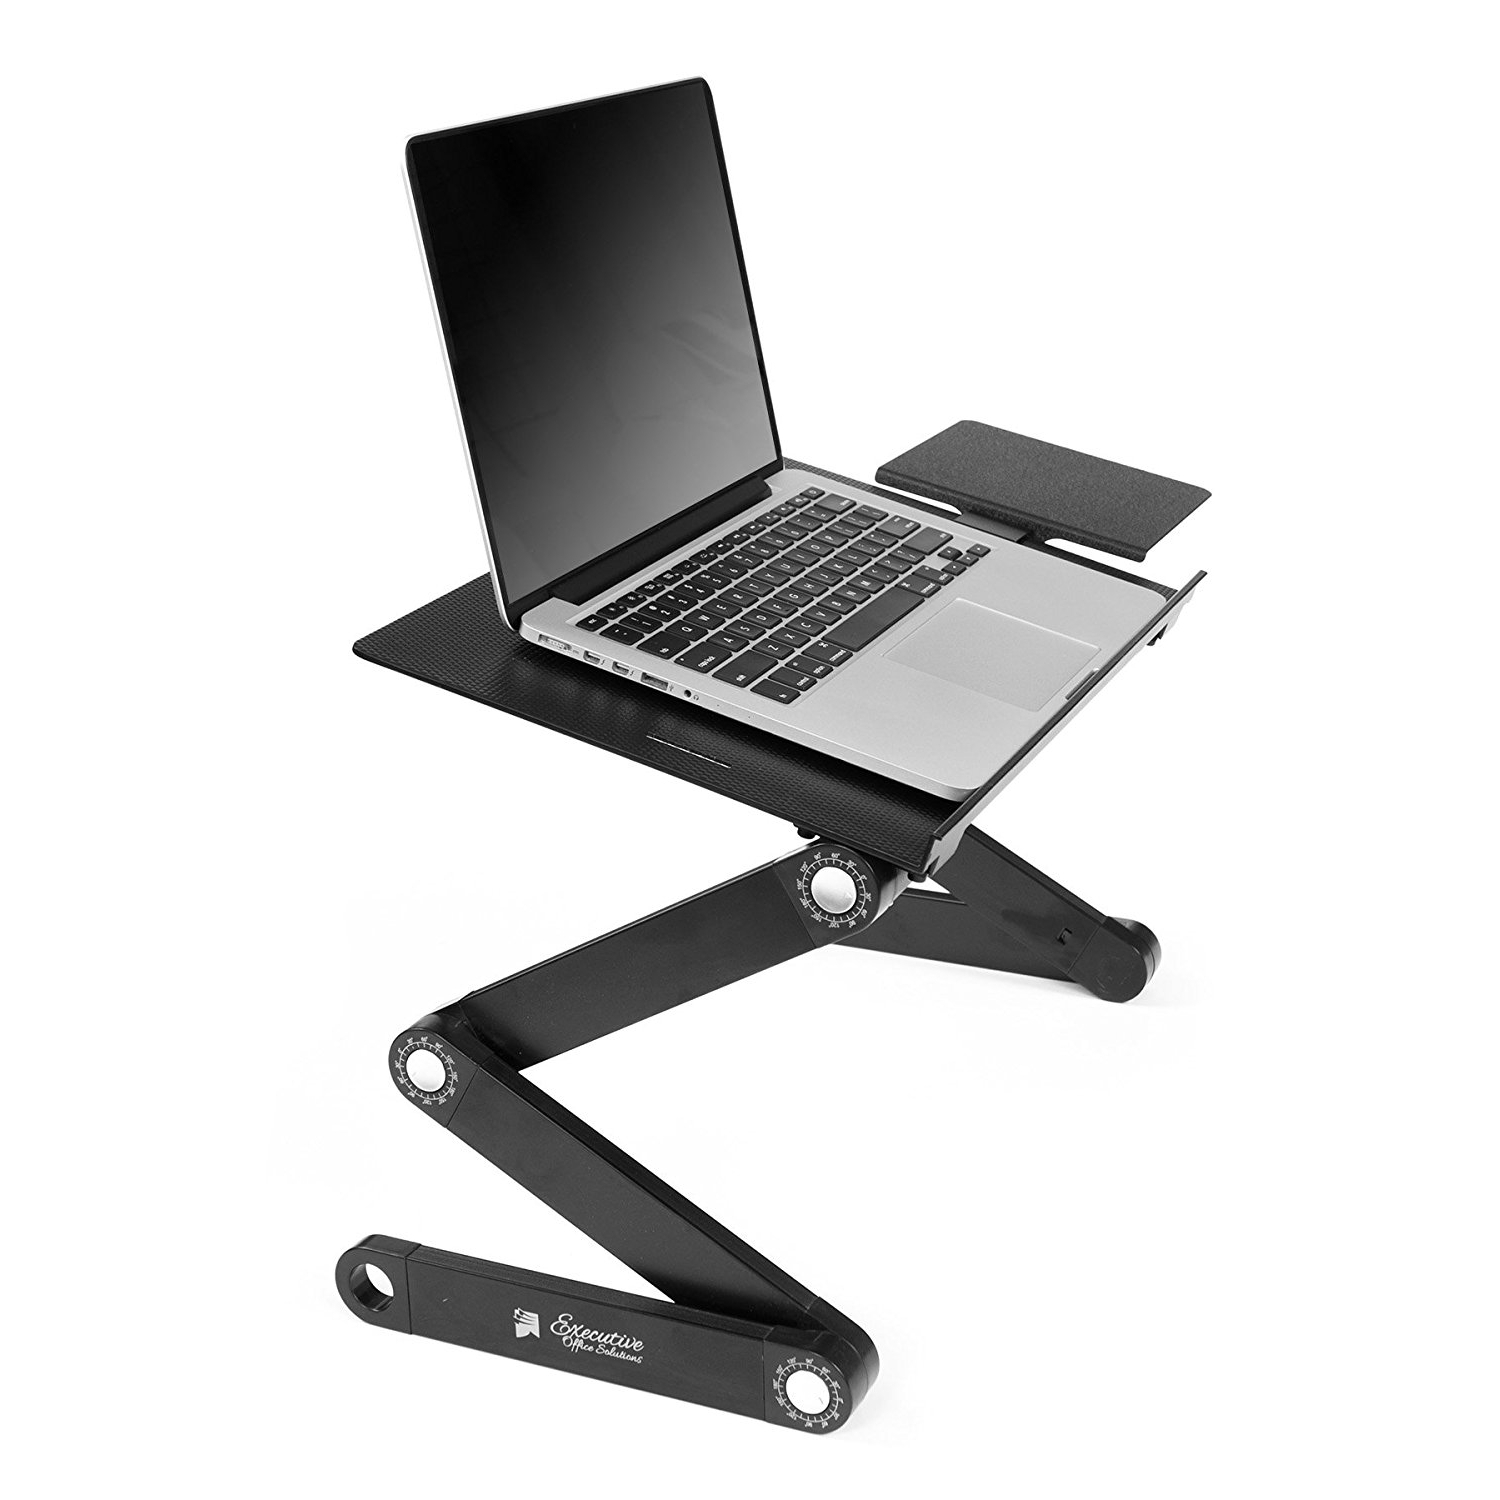 2019 Ultra-Large, Upgraded Sturdier Silver Adjustable Laptop Stand, Portable Laptop Stand for Bed/Sofa with Large Cooling Fan & Mouse Pad Side as Gift Foldable Aluminum Laptop Desk/Table 